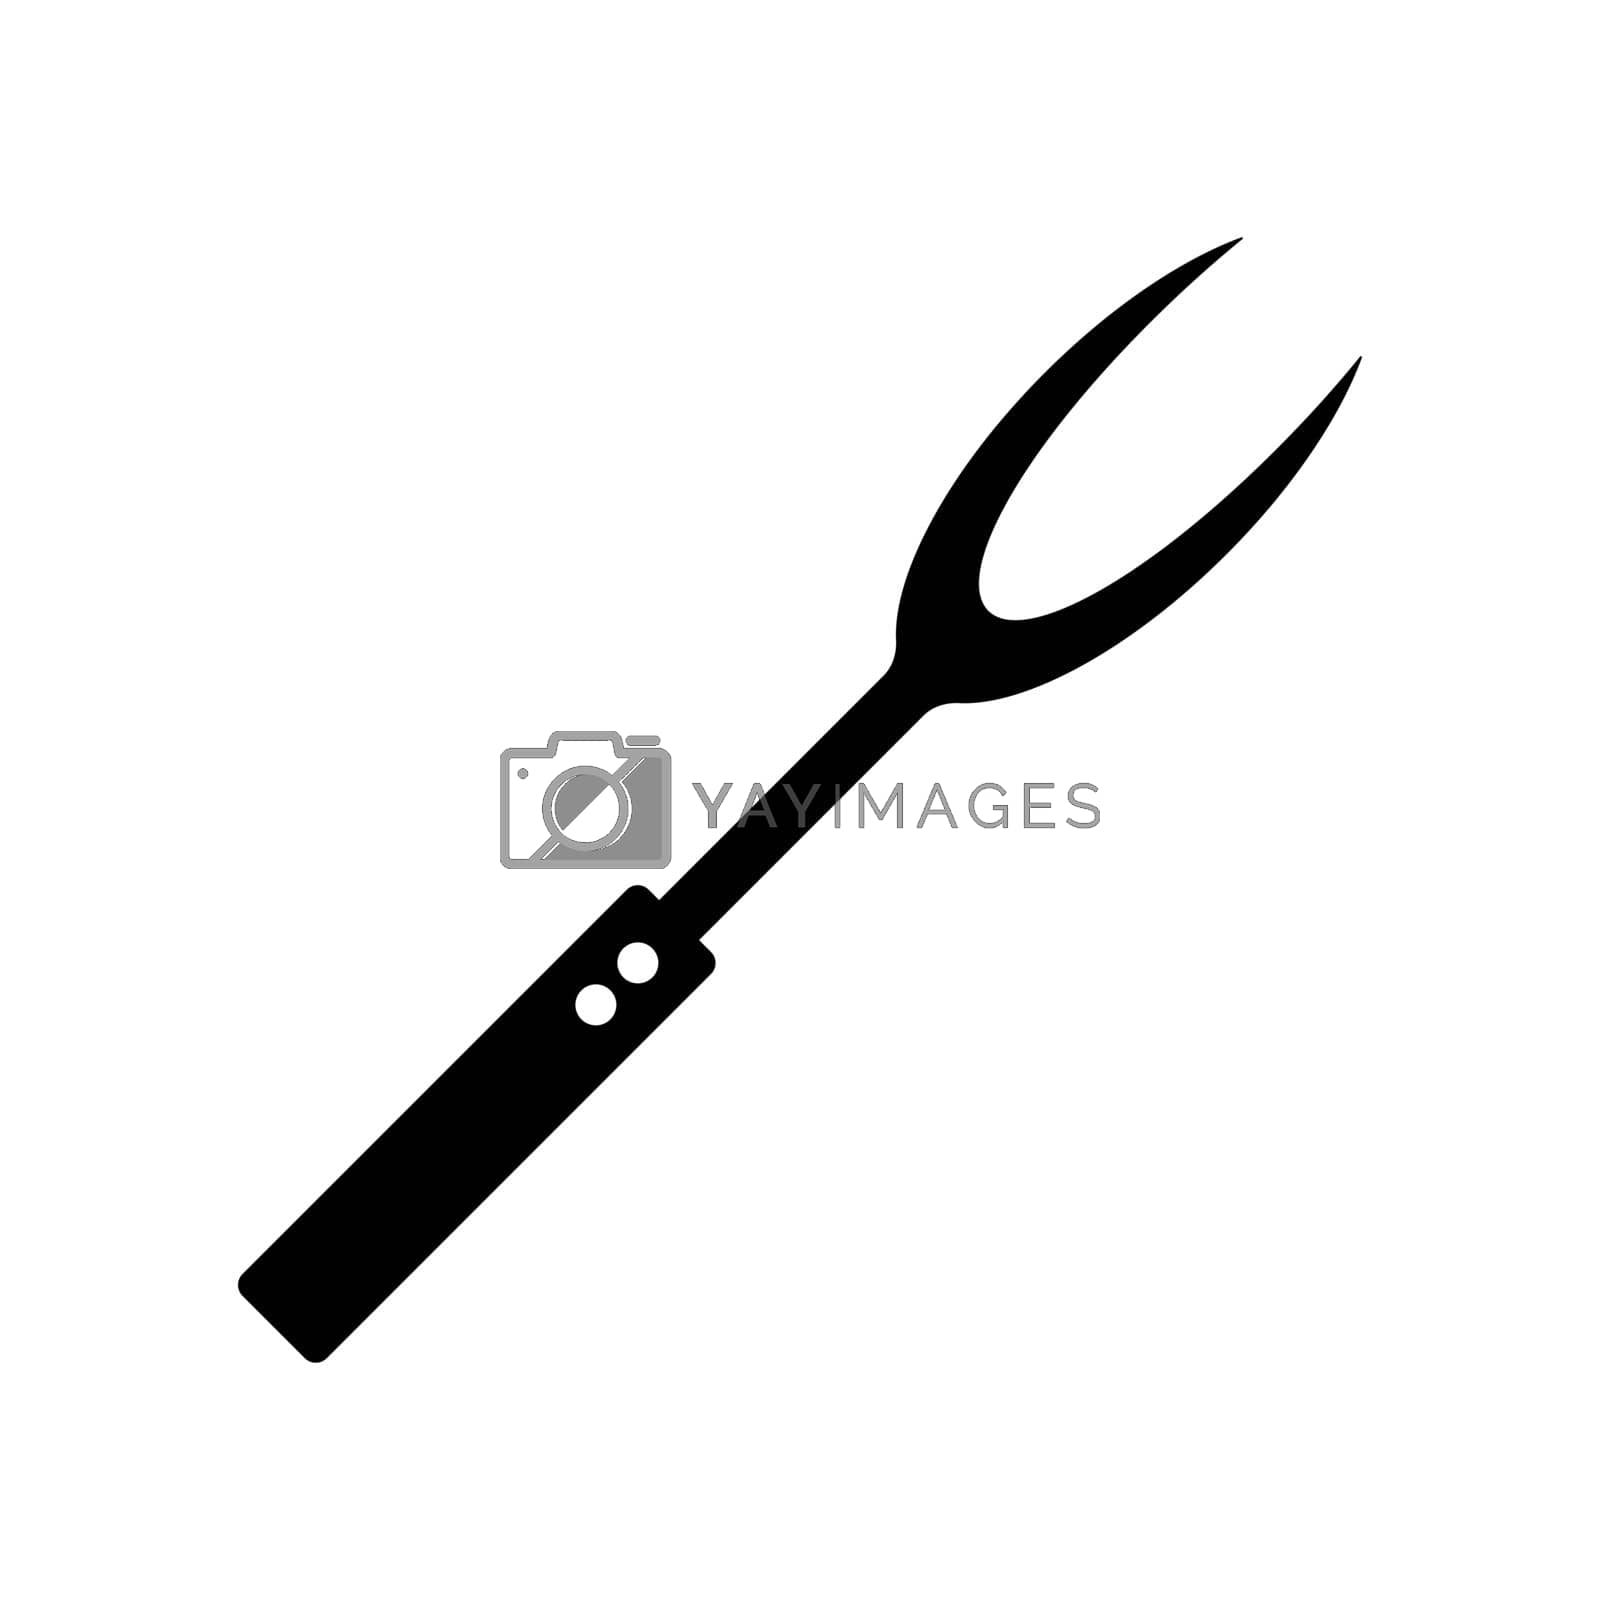 Royalty free image of Big kitchen fork vector icon. Kitchen appliances by nosik